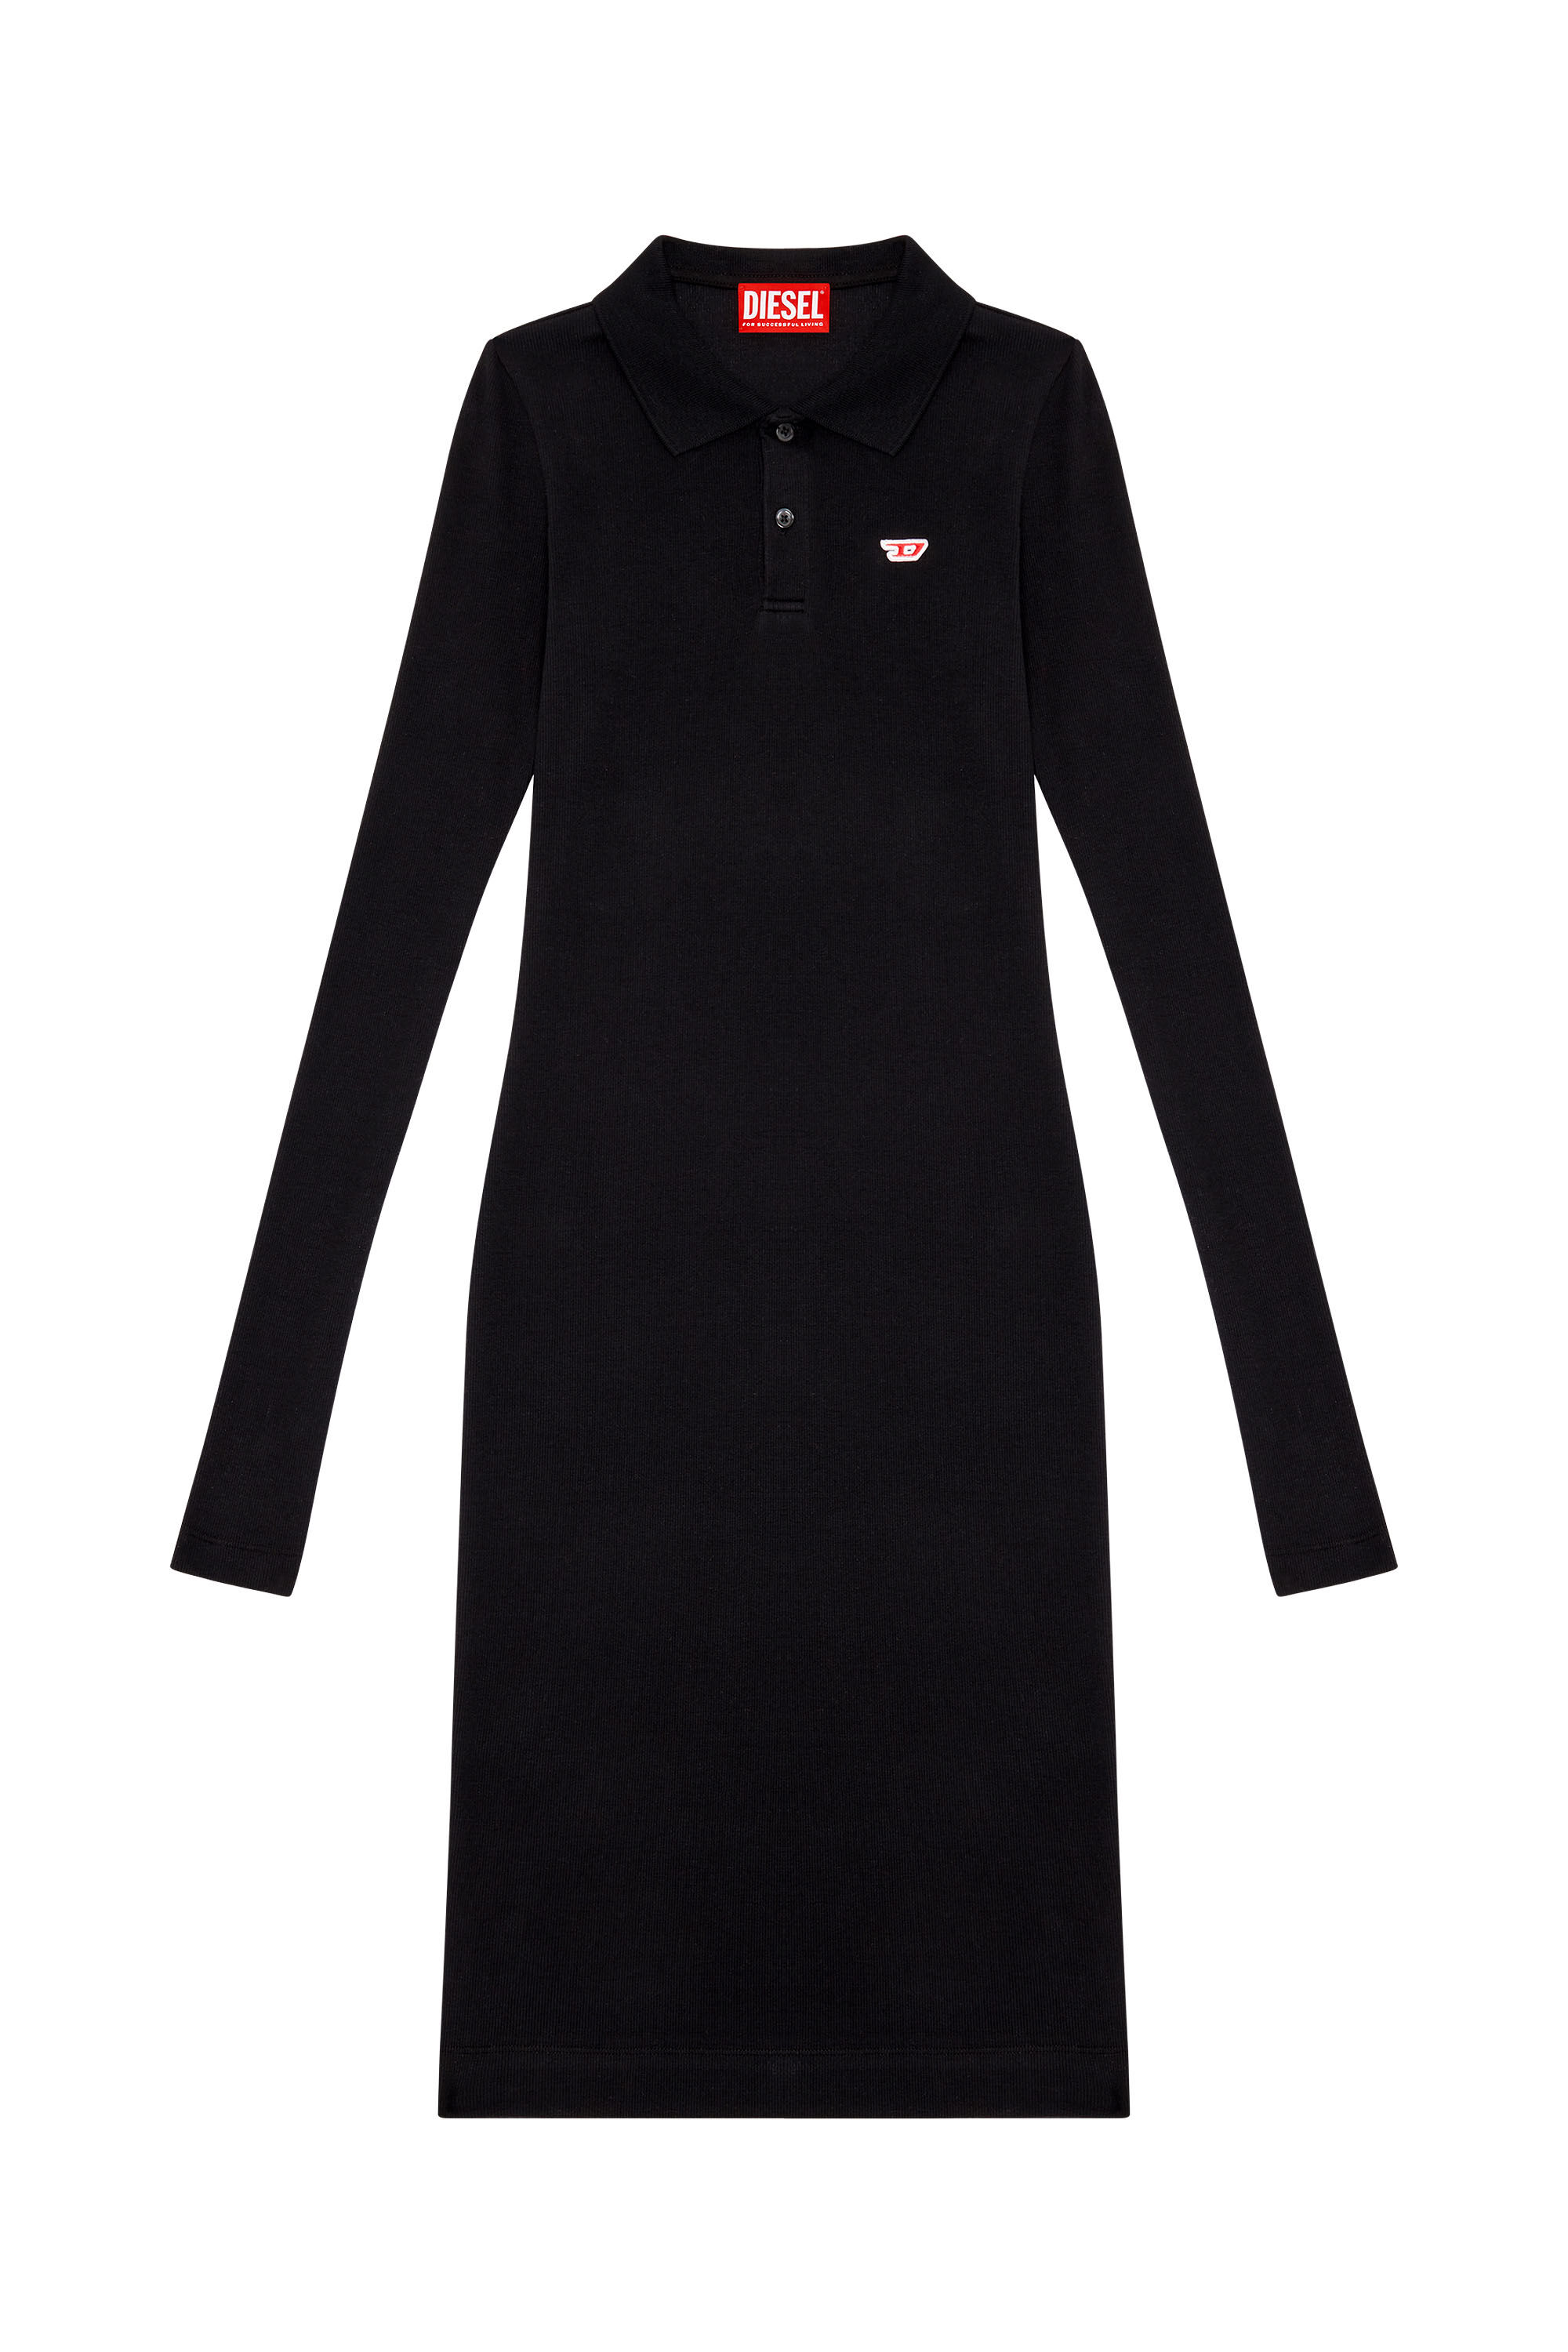 Diesel - D-RIBENNY-LS-D, Woman Polo dress with D logo in Black - Image 2